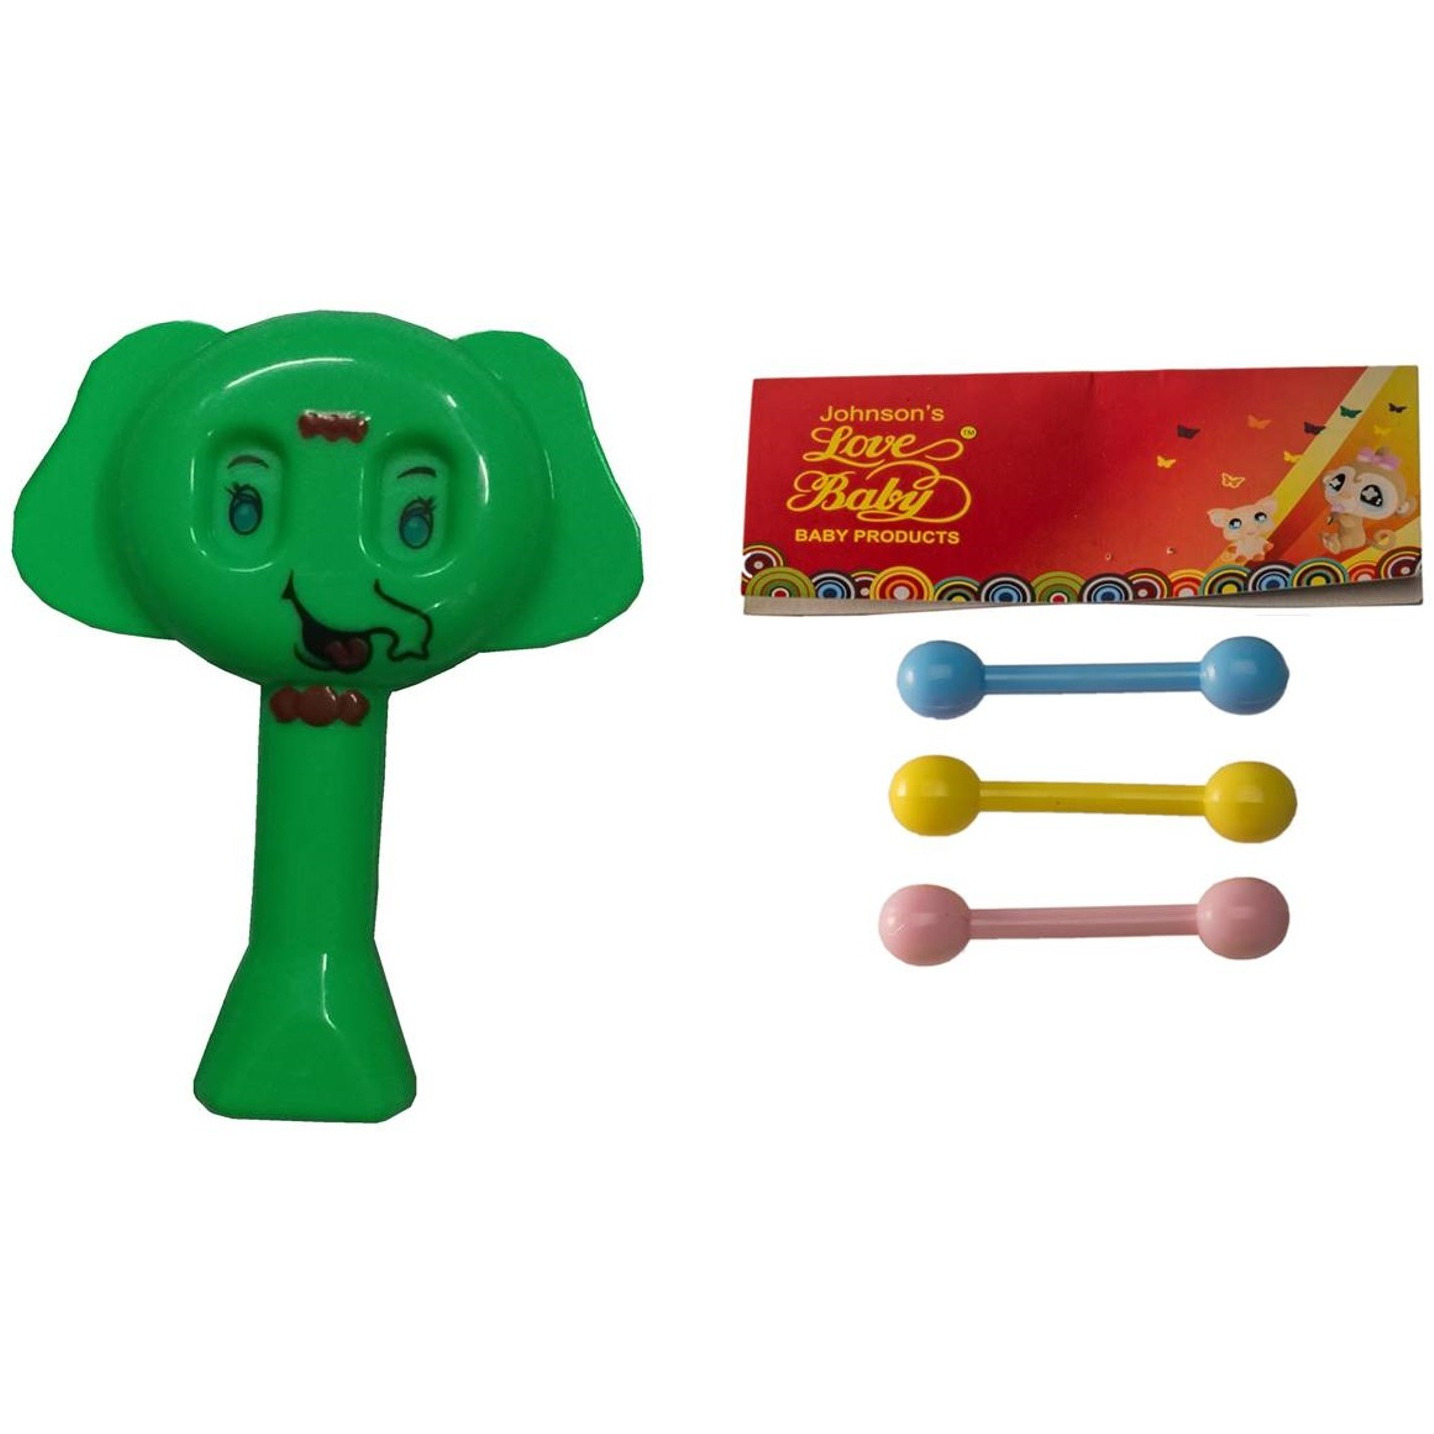 Auto Flow Rattle Toy- Elephant Toy - BT25 Combo Green